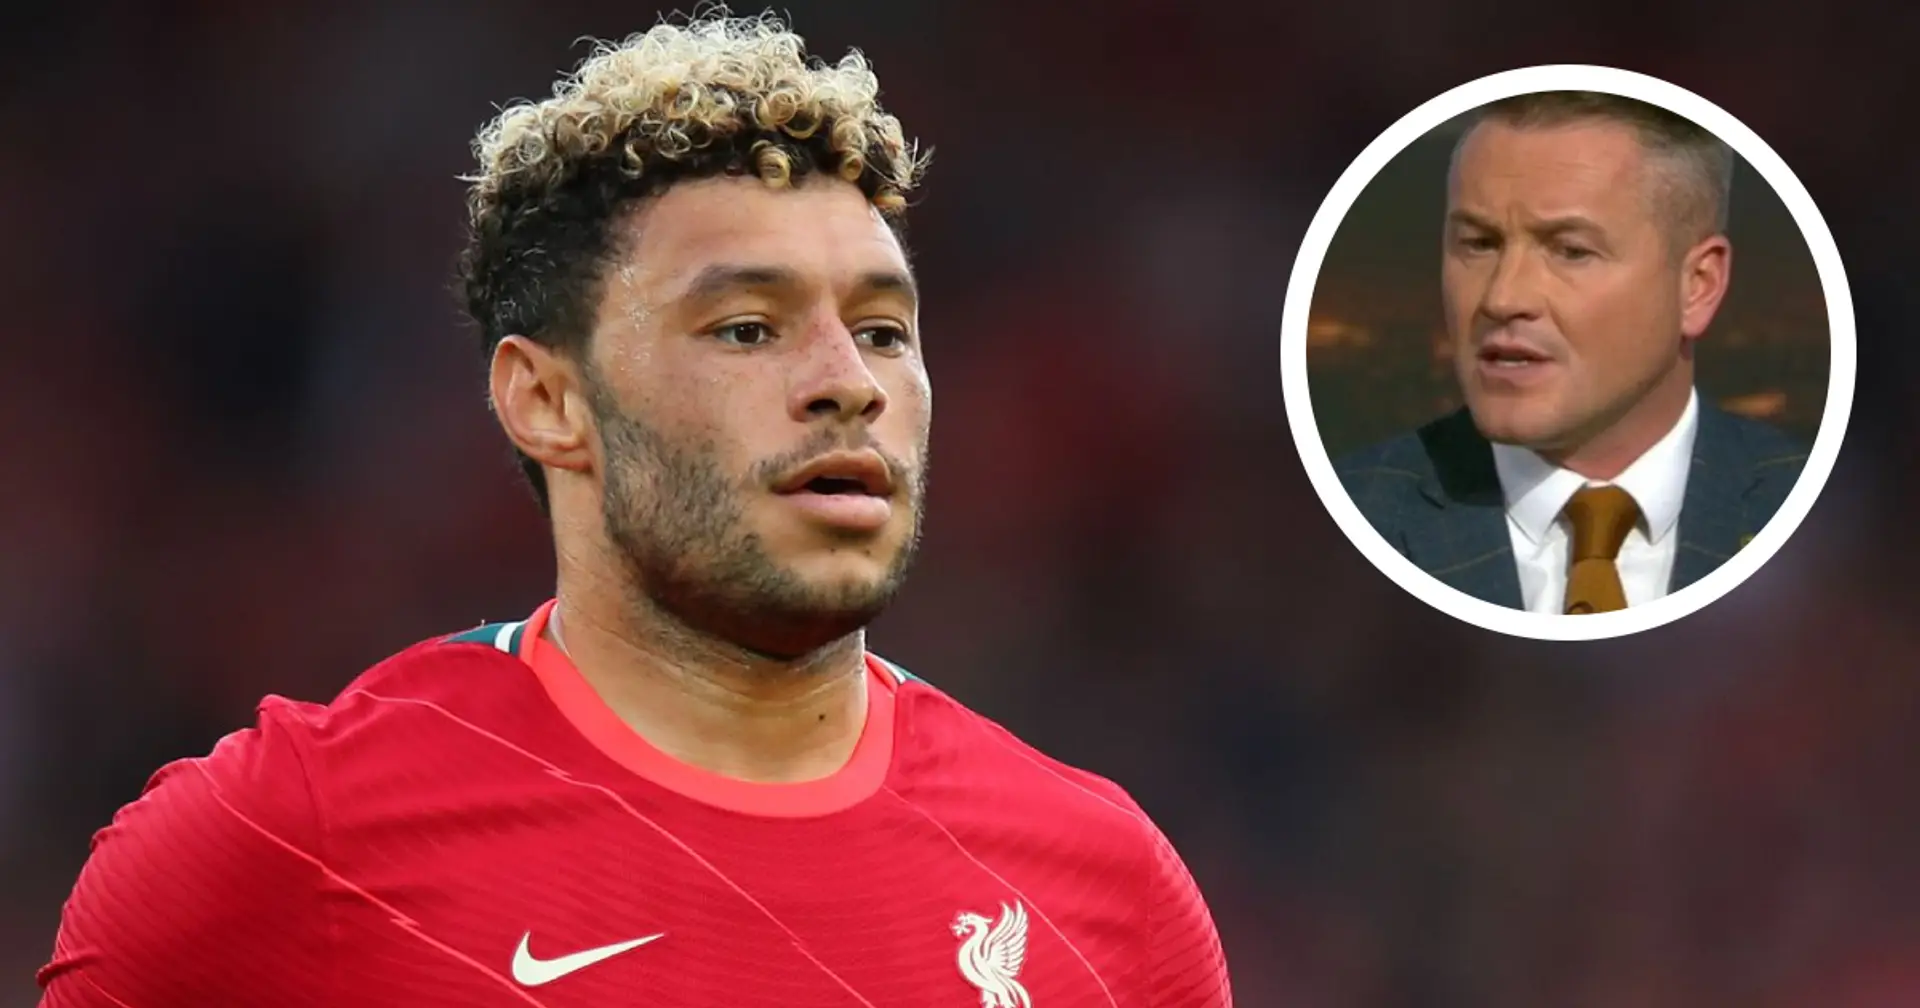 'It's criminal': Ex-PL player Paul Robinson explains why LFC might not sell 'ideal' Oxlade-Chamberlain